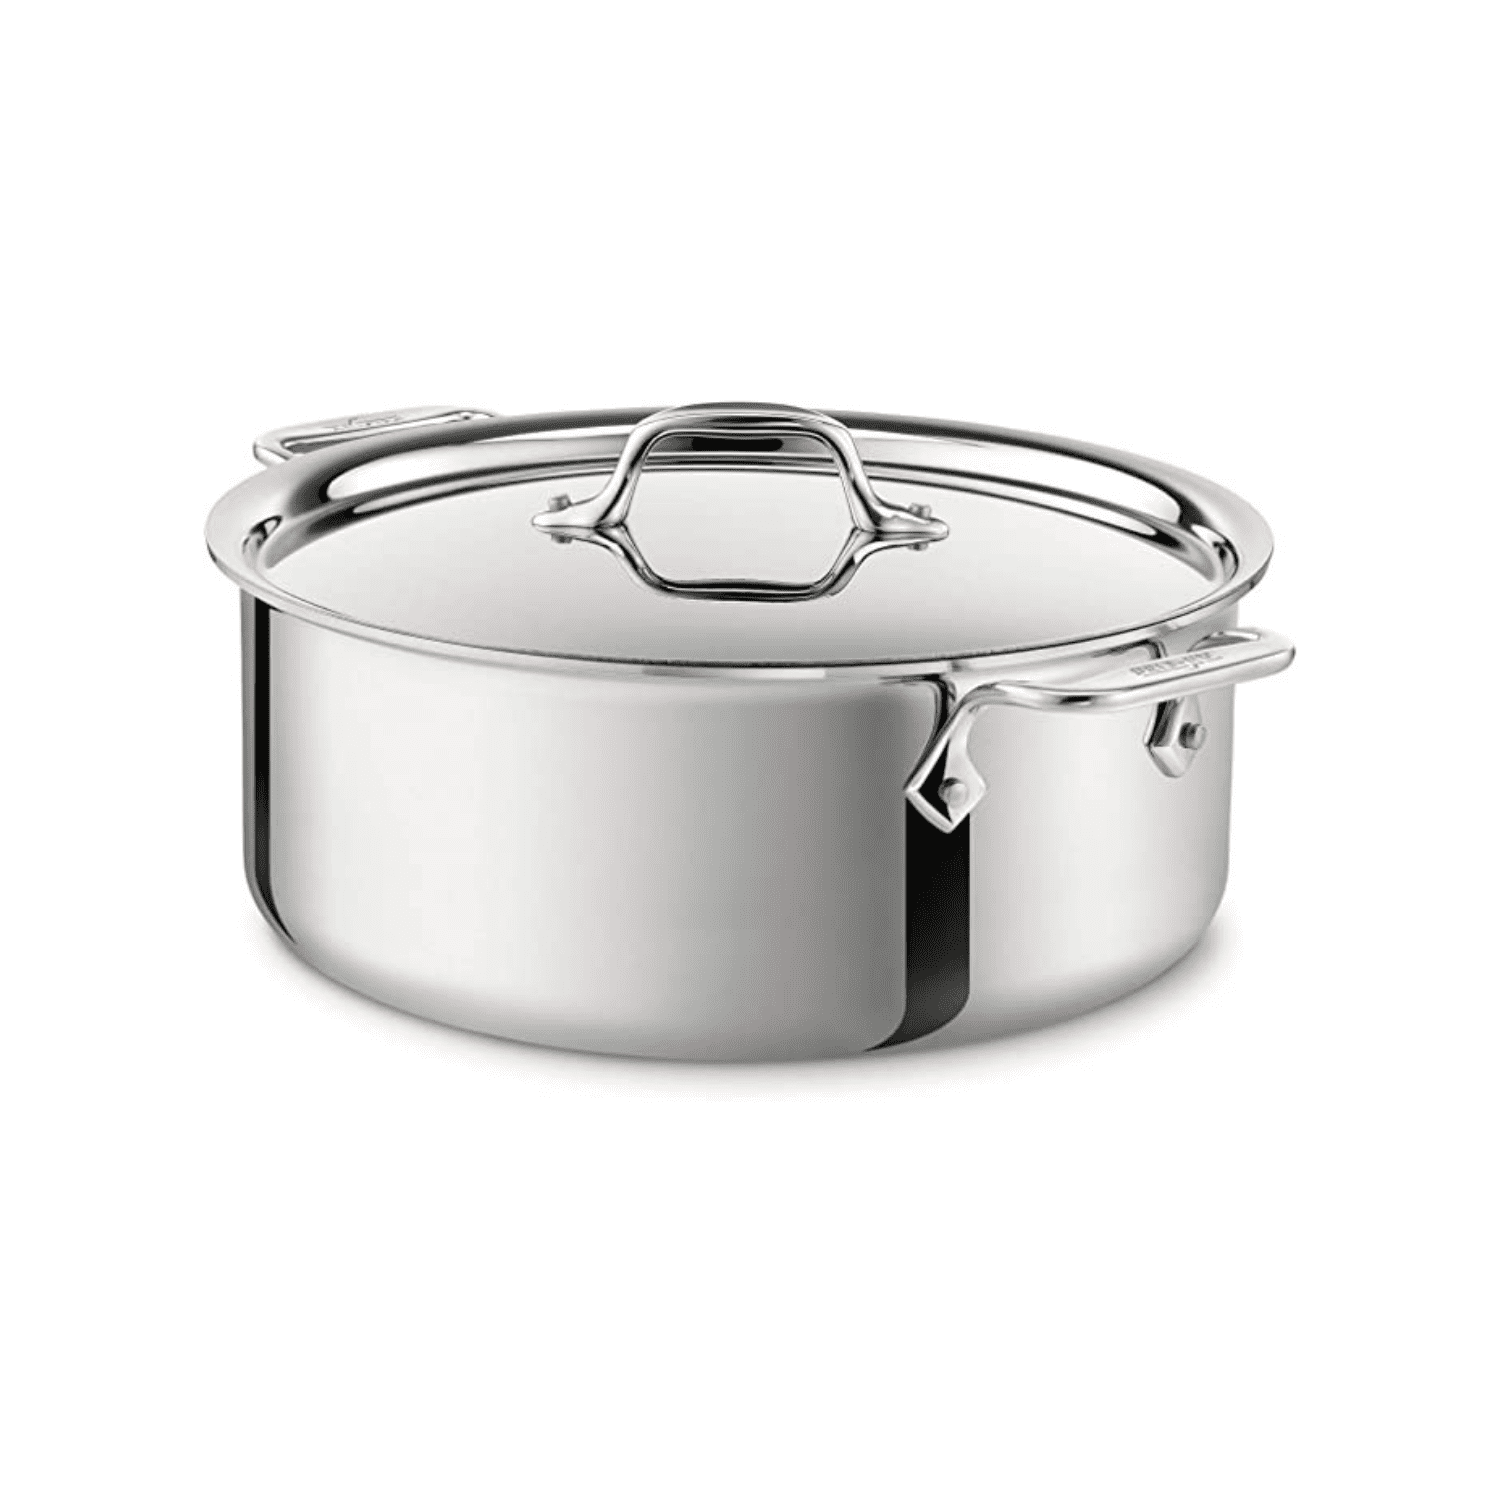 All-Clad Stainless Steel 6-Quart Pot with Lid